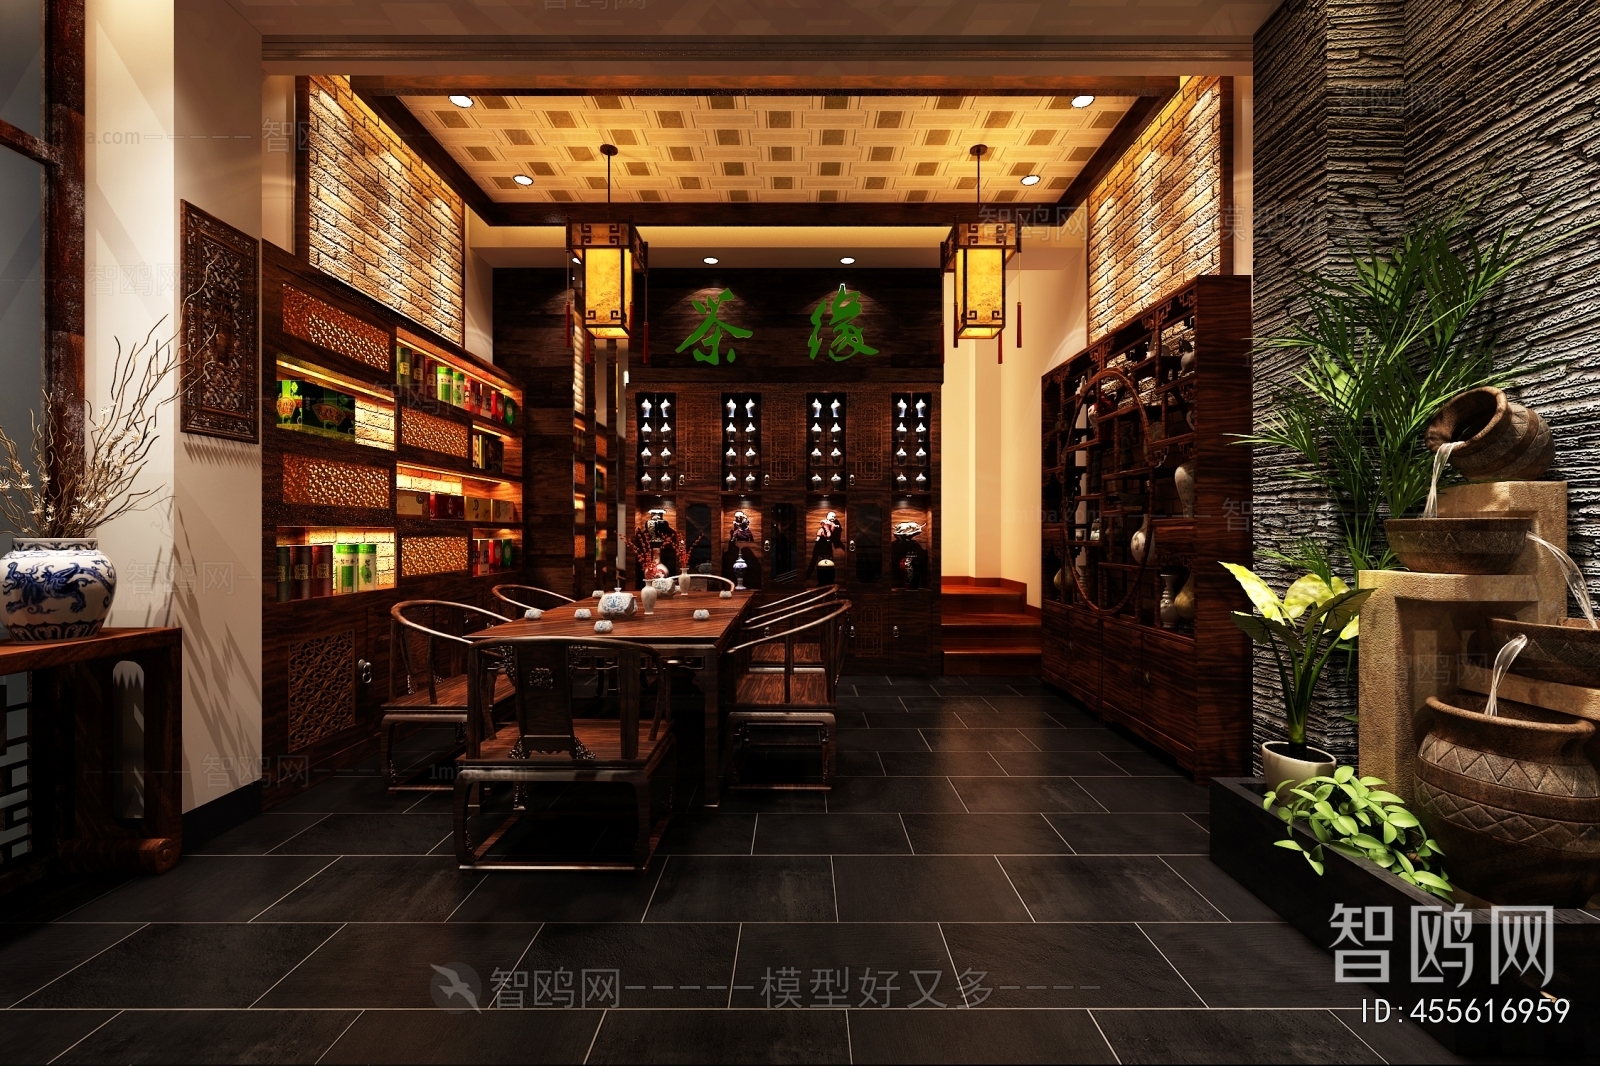 Chinese Style Tea Shop